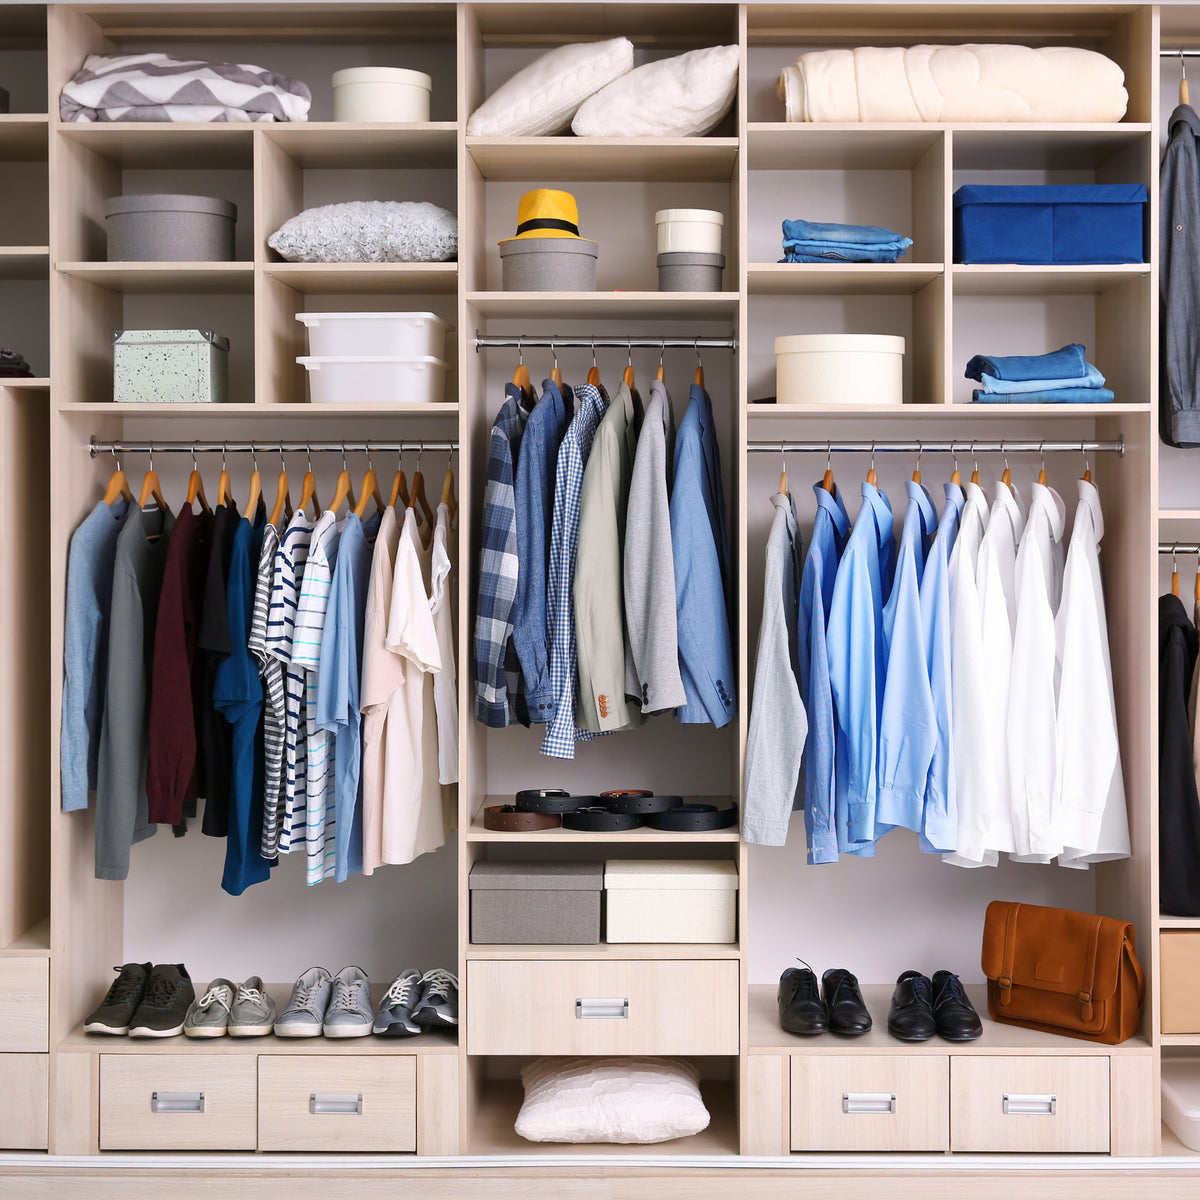 ORGANIZE YOUR CLOTHING GAME